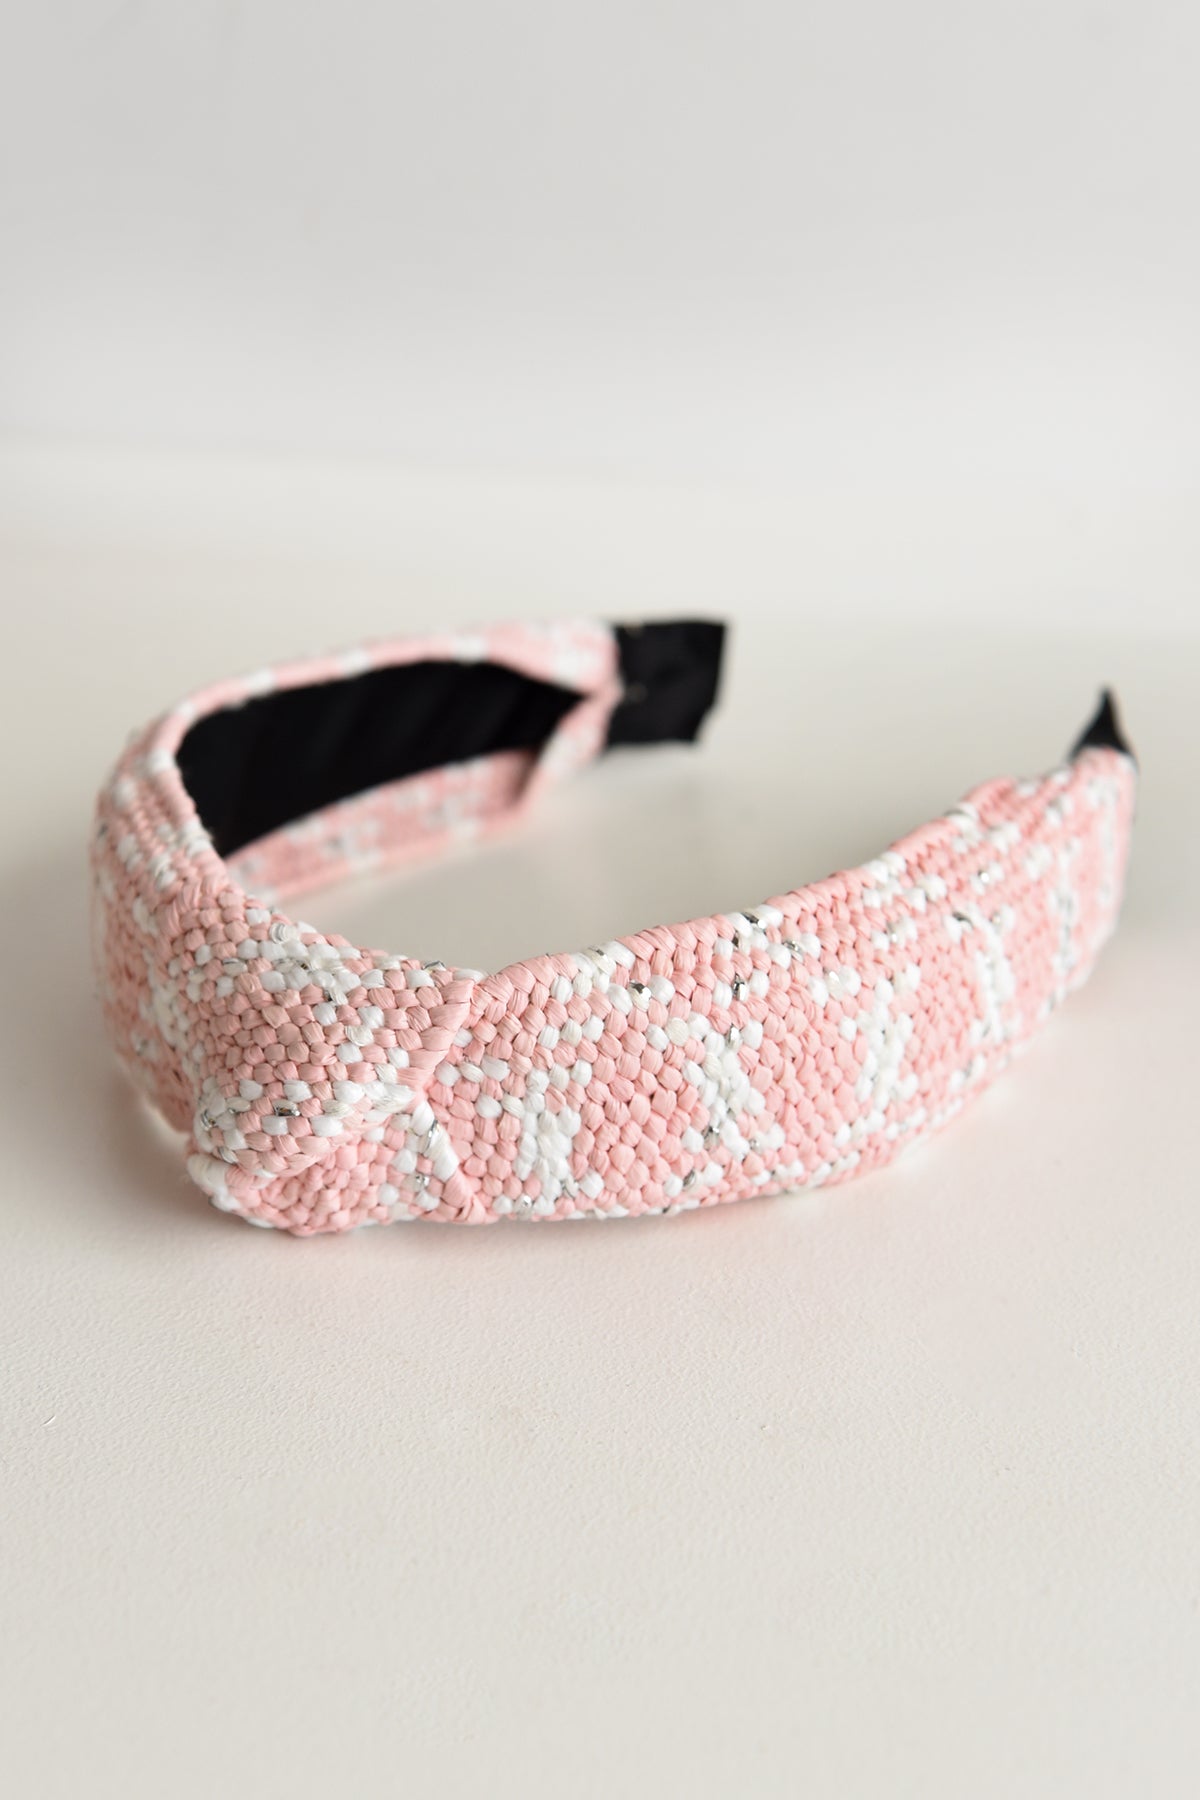 PINK AND WHITE KNOTTED HEADBAND